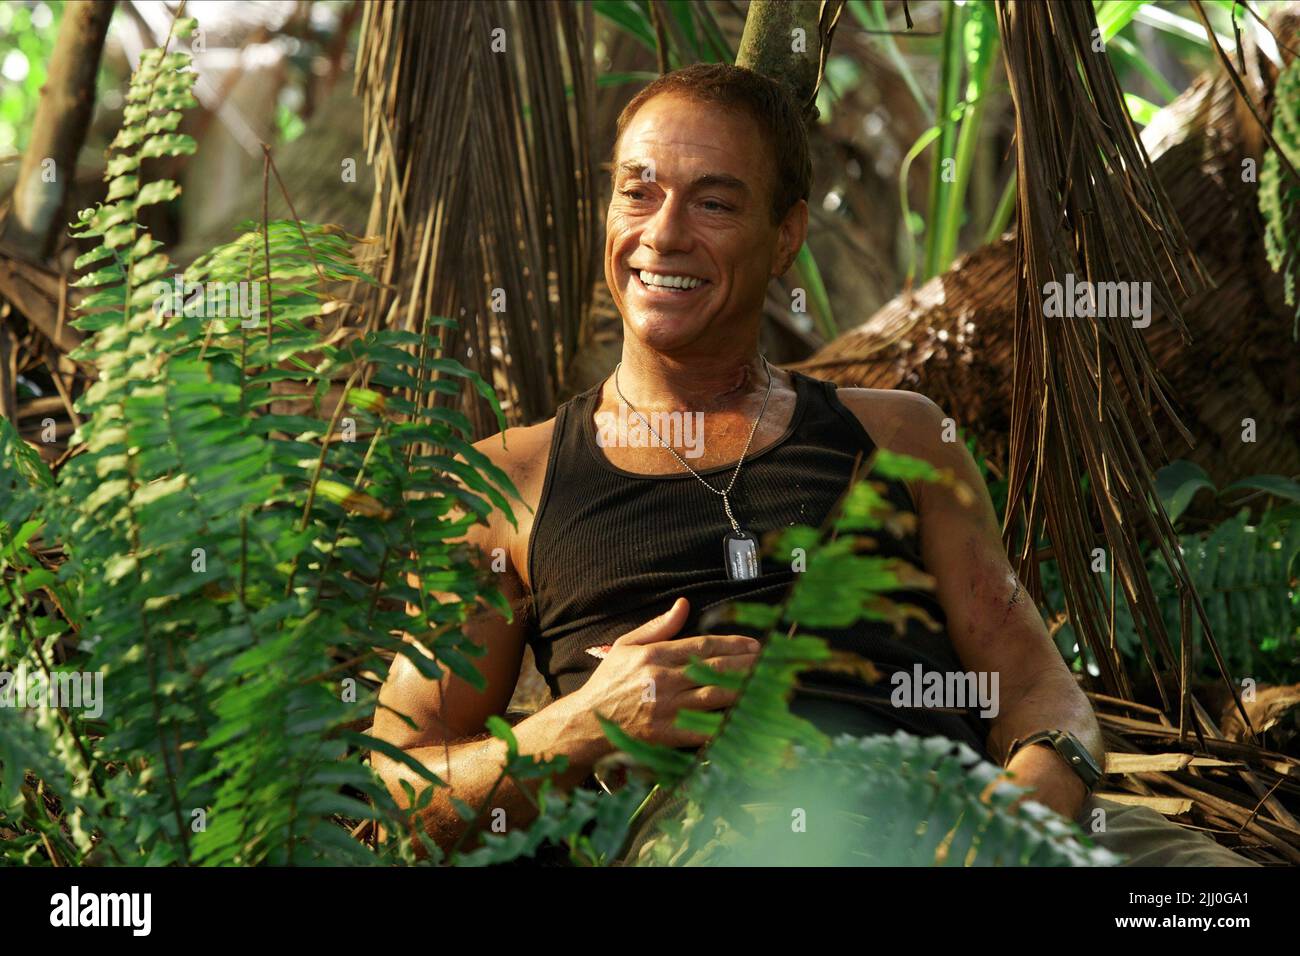 JEAN-CLAUDE VAN DAMME, WELCOME TO THE JUNGLE, 2013 Stock Photo - Alamy